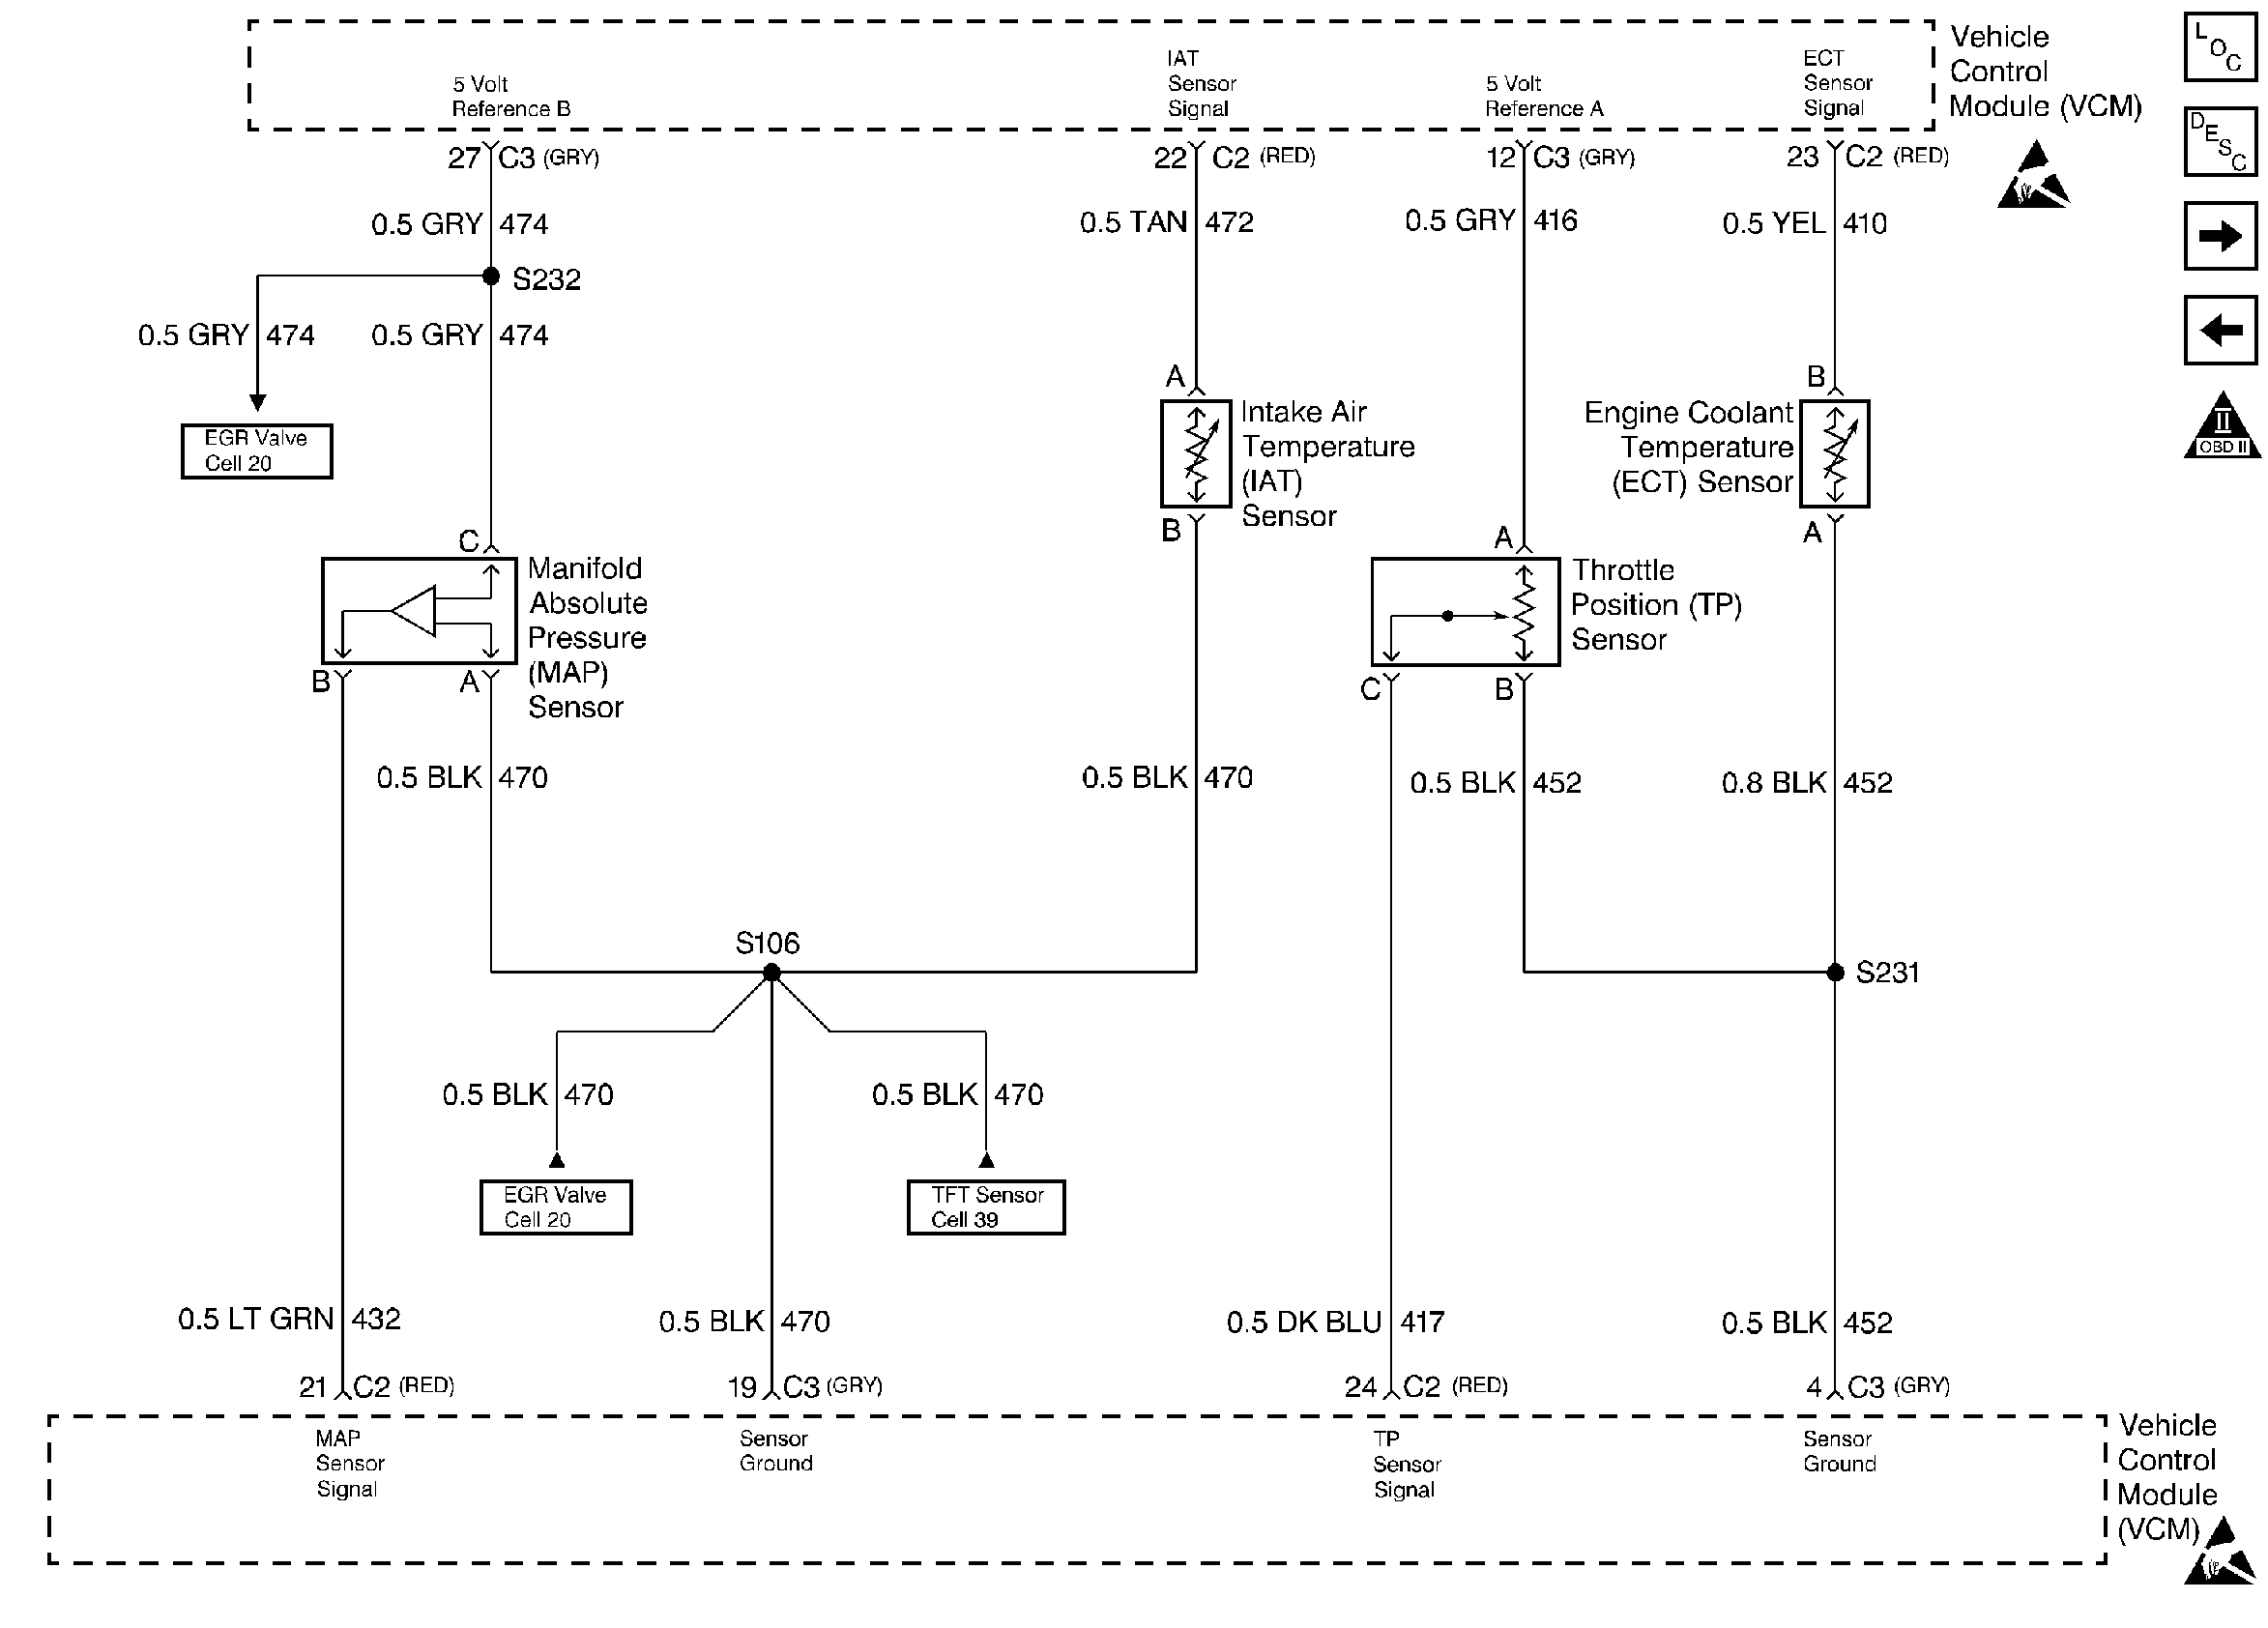 what are the two ground cables on 5.7 vortec engine wiring diagram c2500 2000 go to?